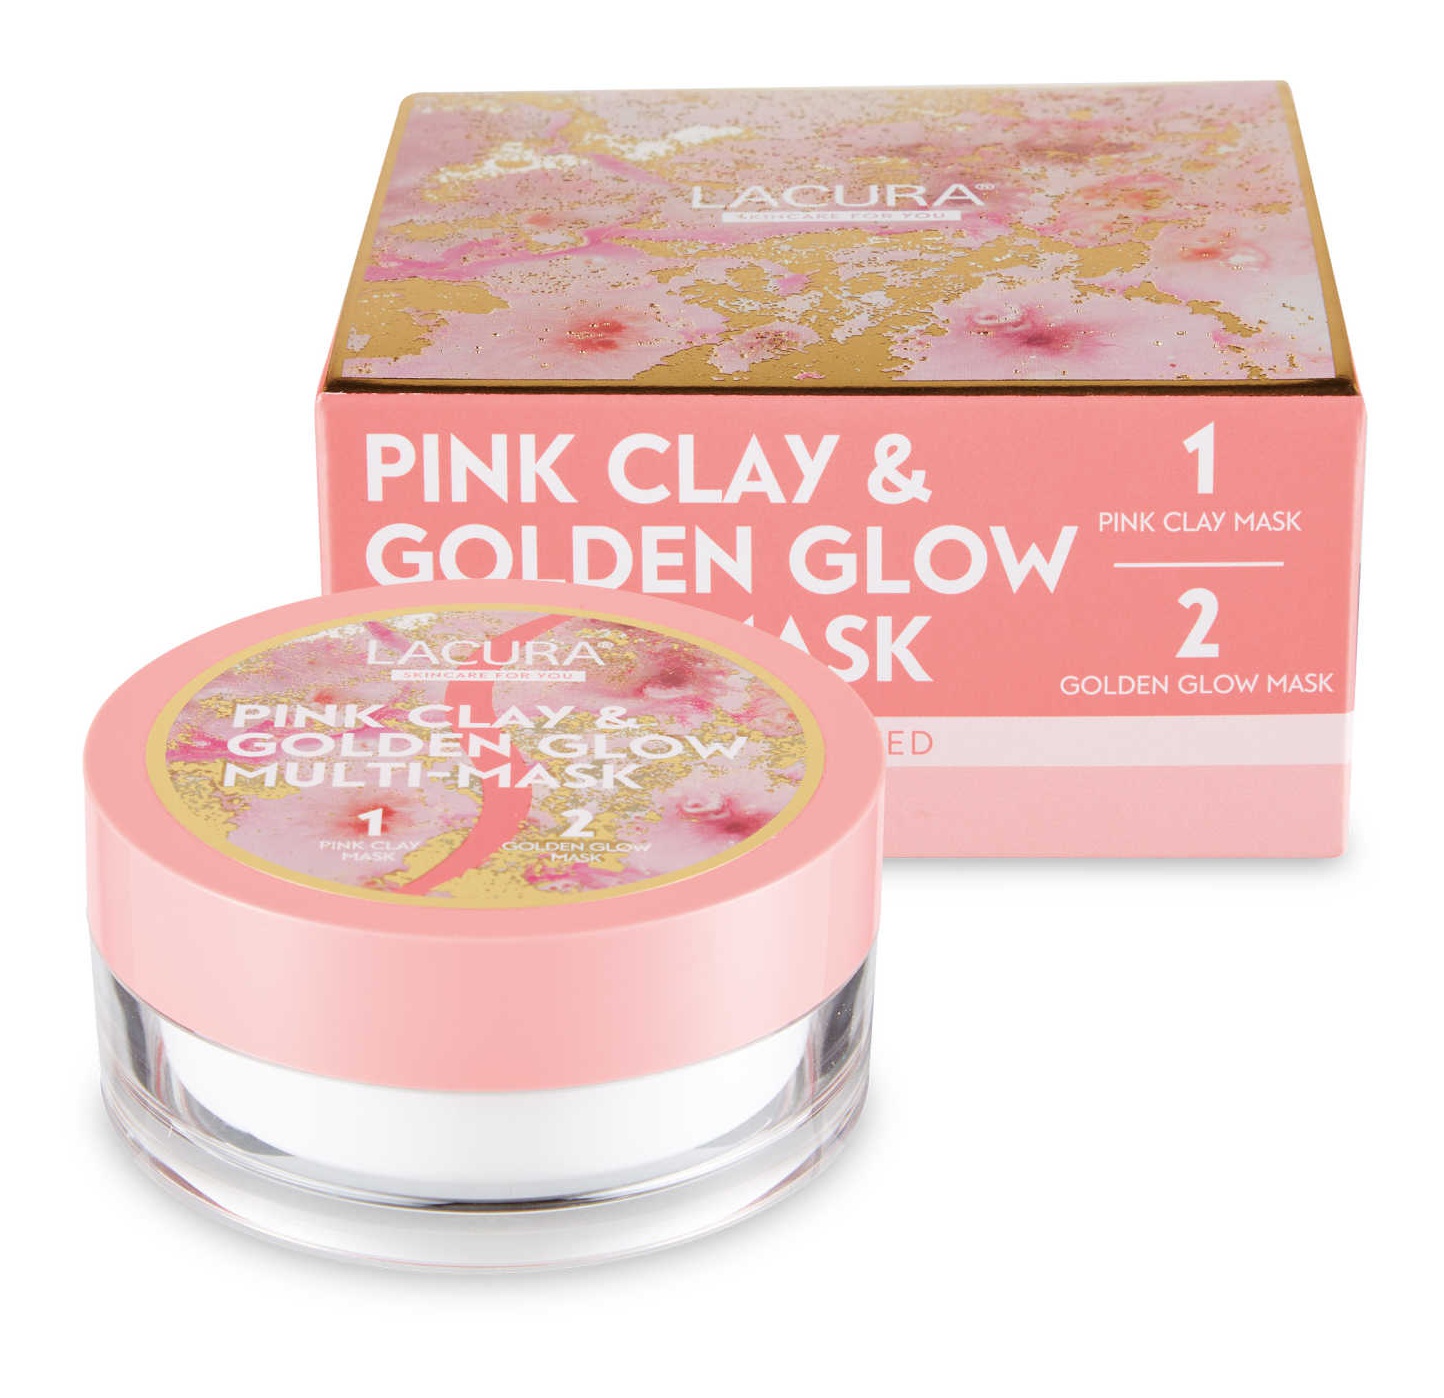 LACURA Pink Clay And Golden Glow Multi-Mask